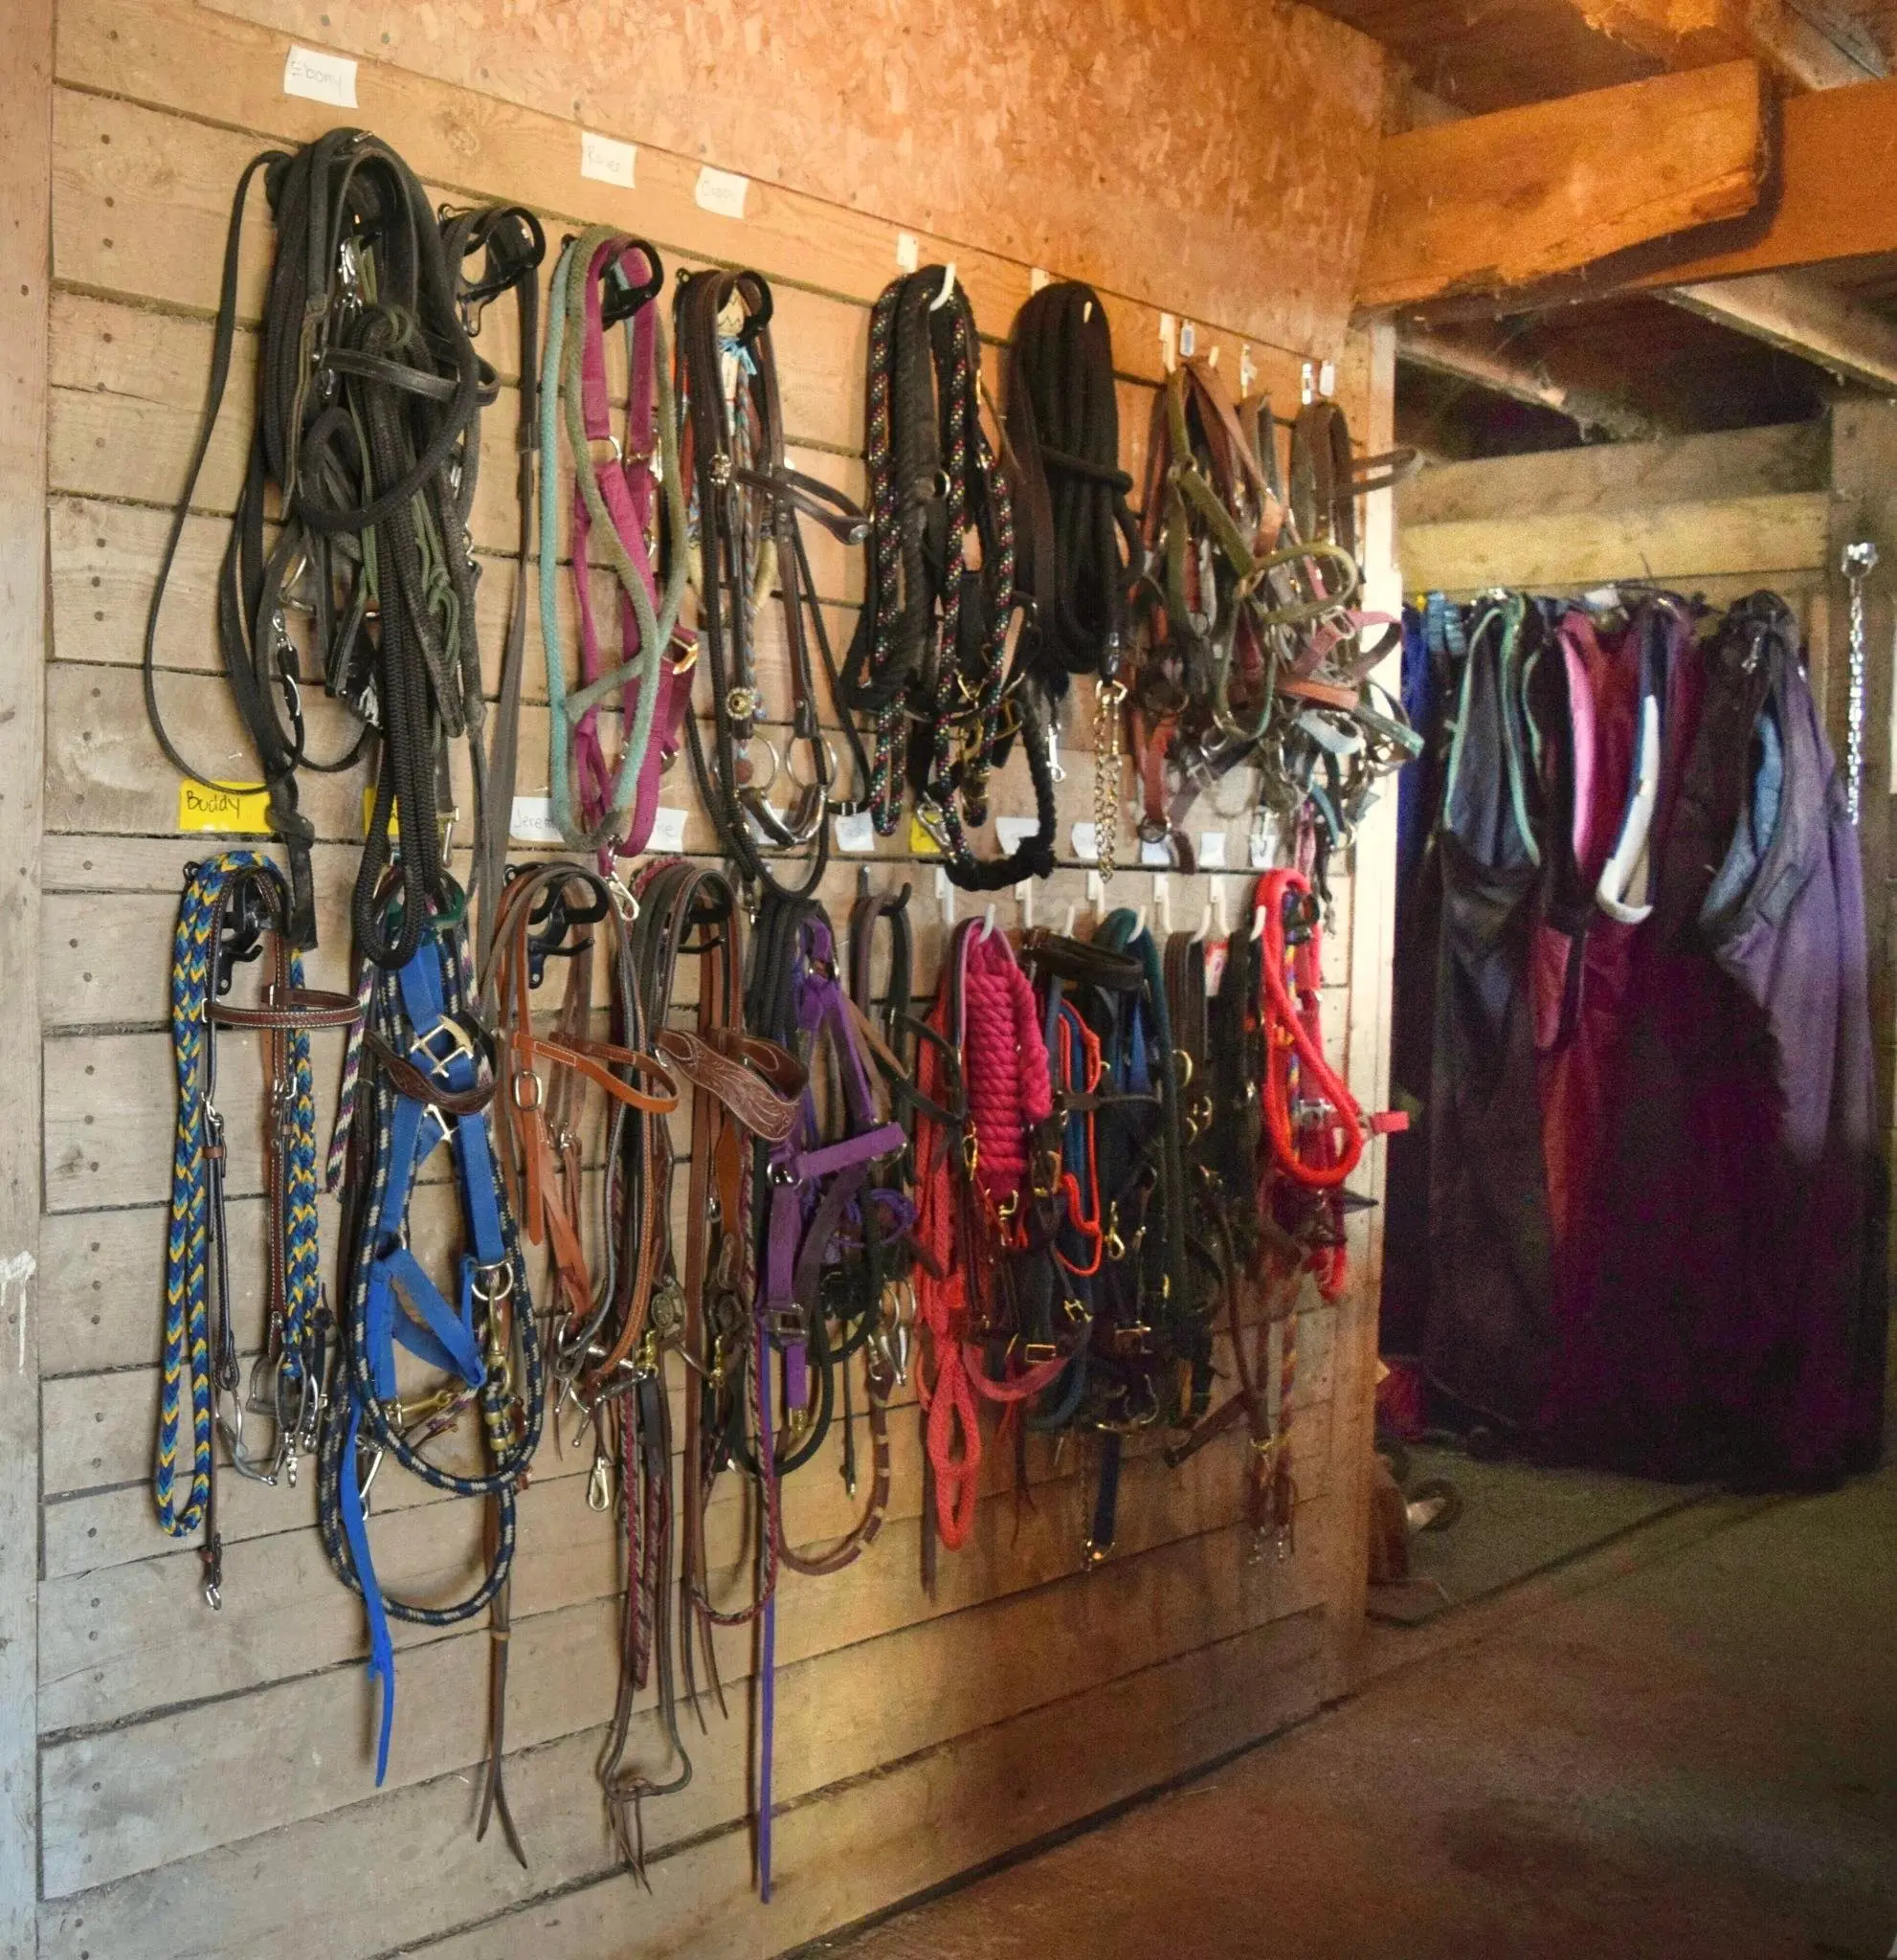 Bridles hung on the wall